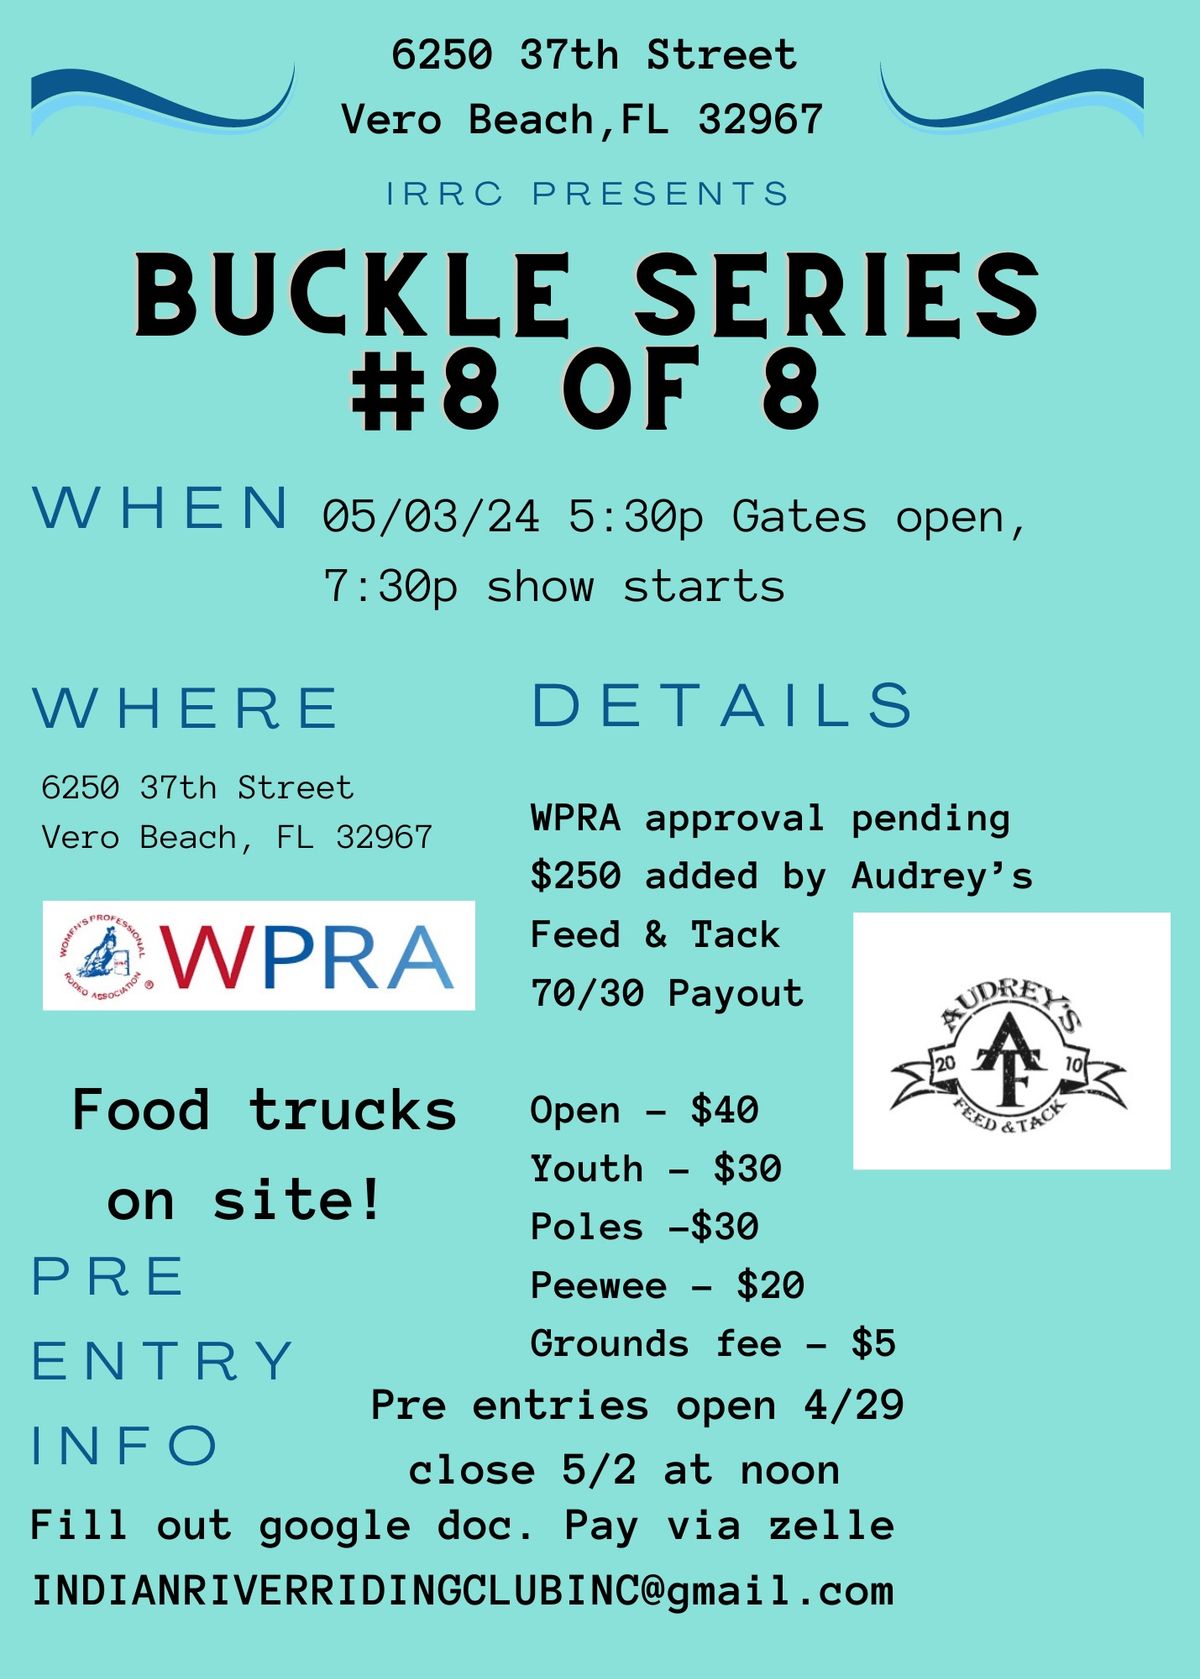 IRRC $250 added buckle series #8 of 8